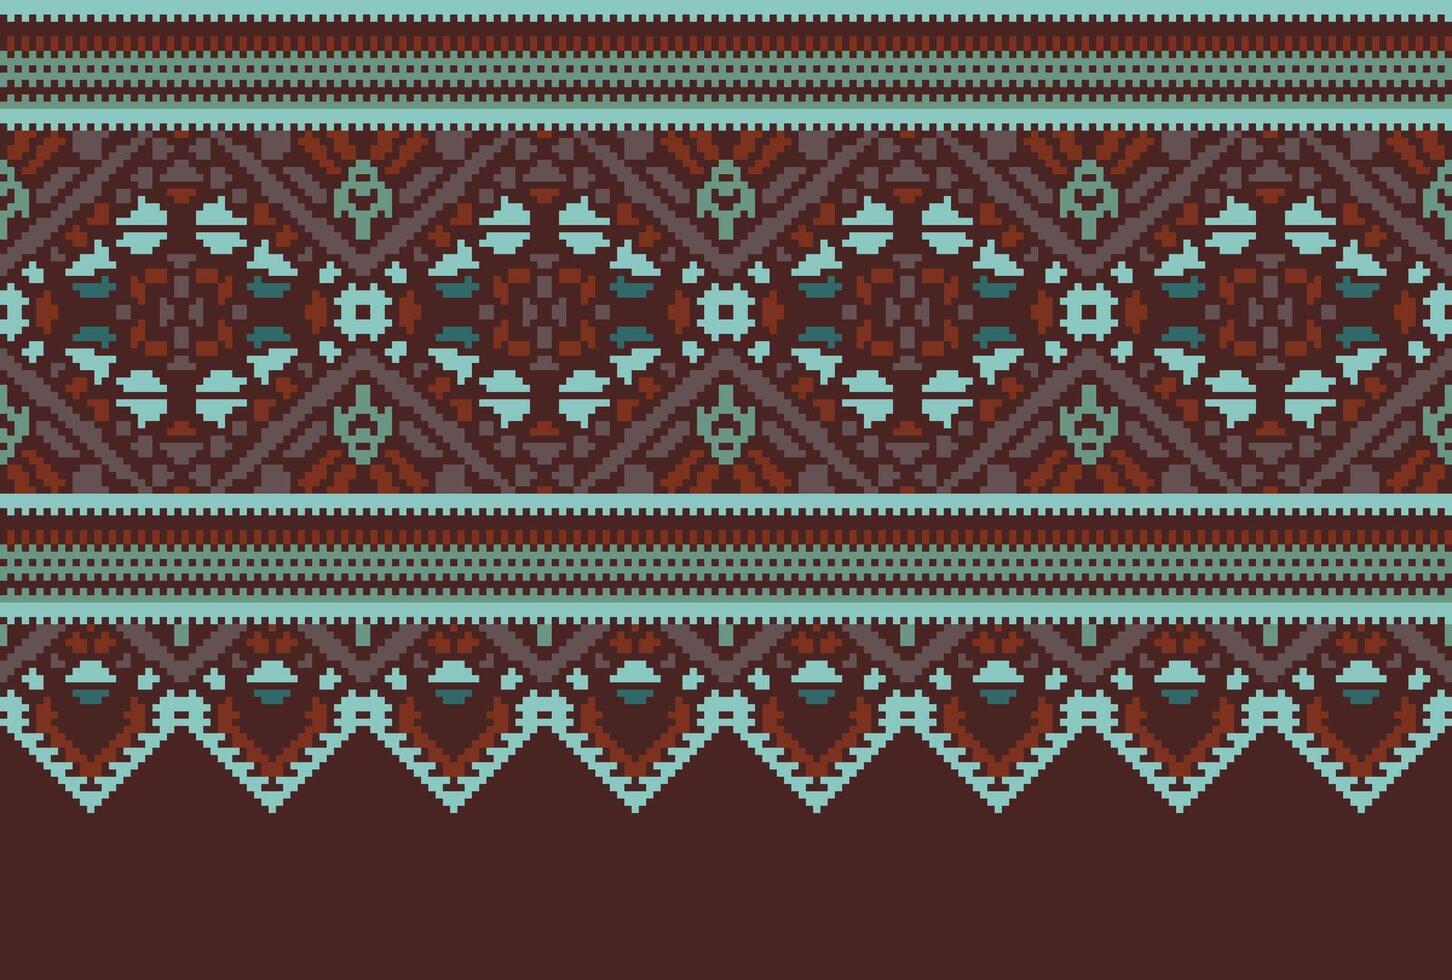 cross stitch traditional ethnic pattern paisley flower Ikat background abstract Aztec African Indonesian Indian seamless pattern for fabric print cloth dress carpet curtains and sarong vector